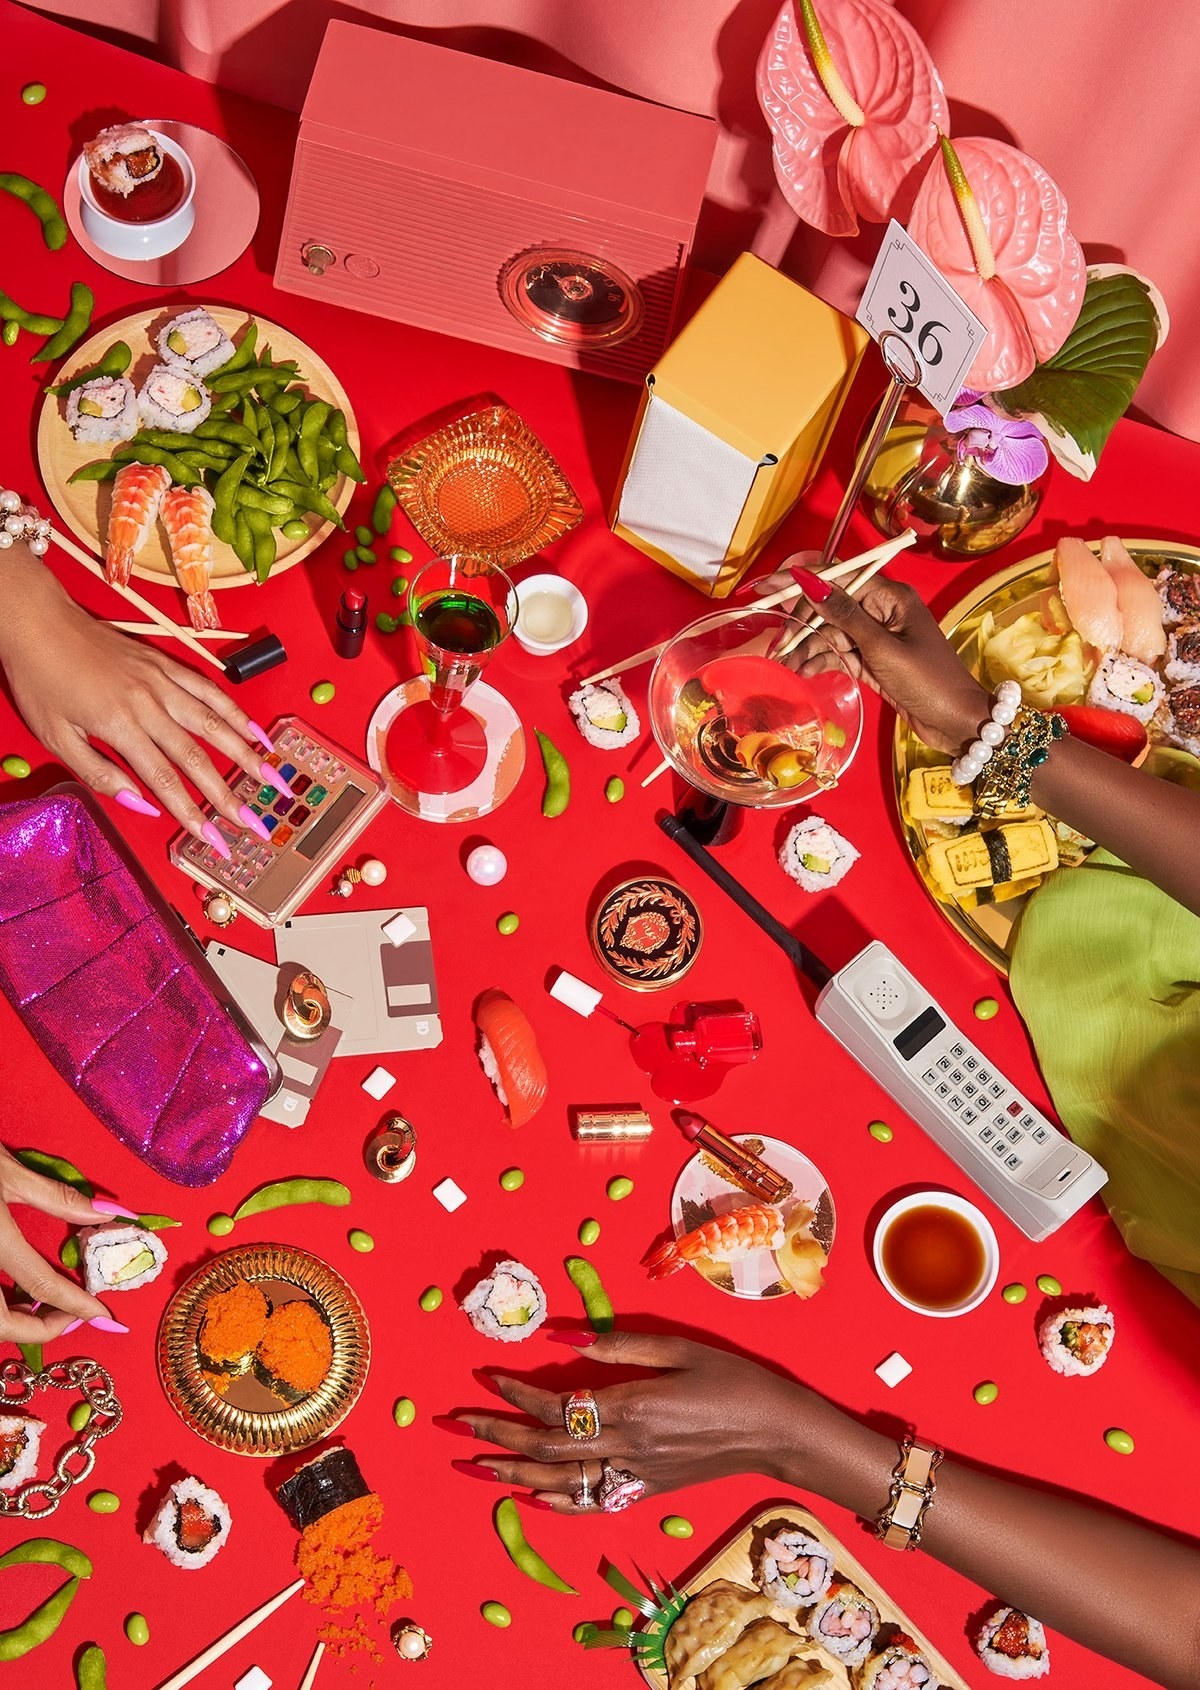 the puzzle featuring three hands, sushi, trinkets, and accessories on a bright red background